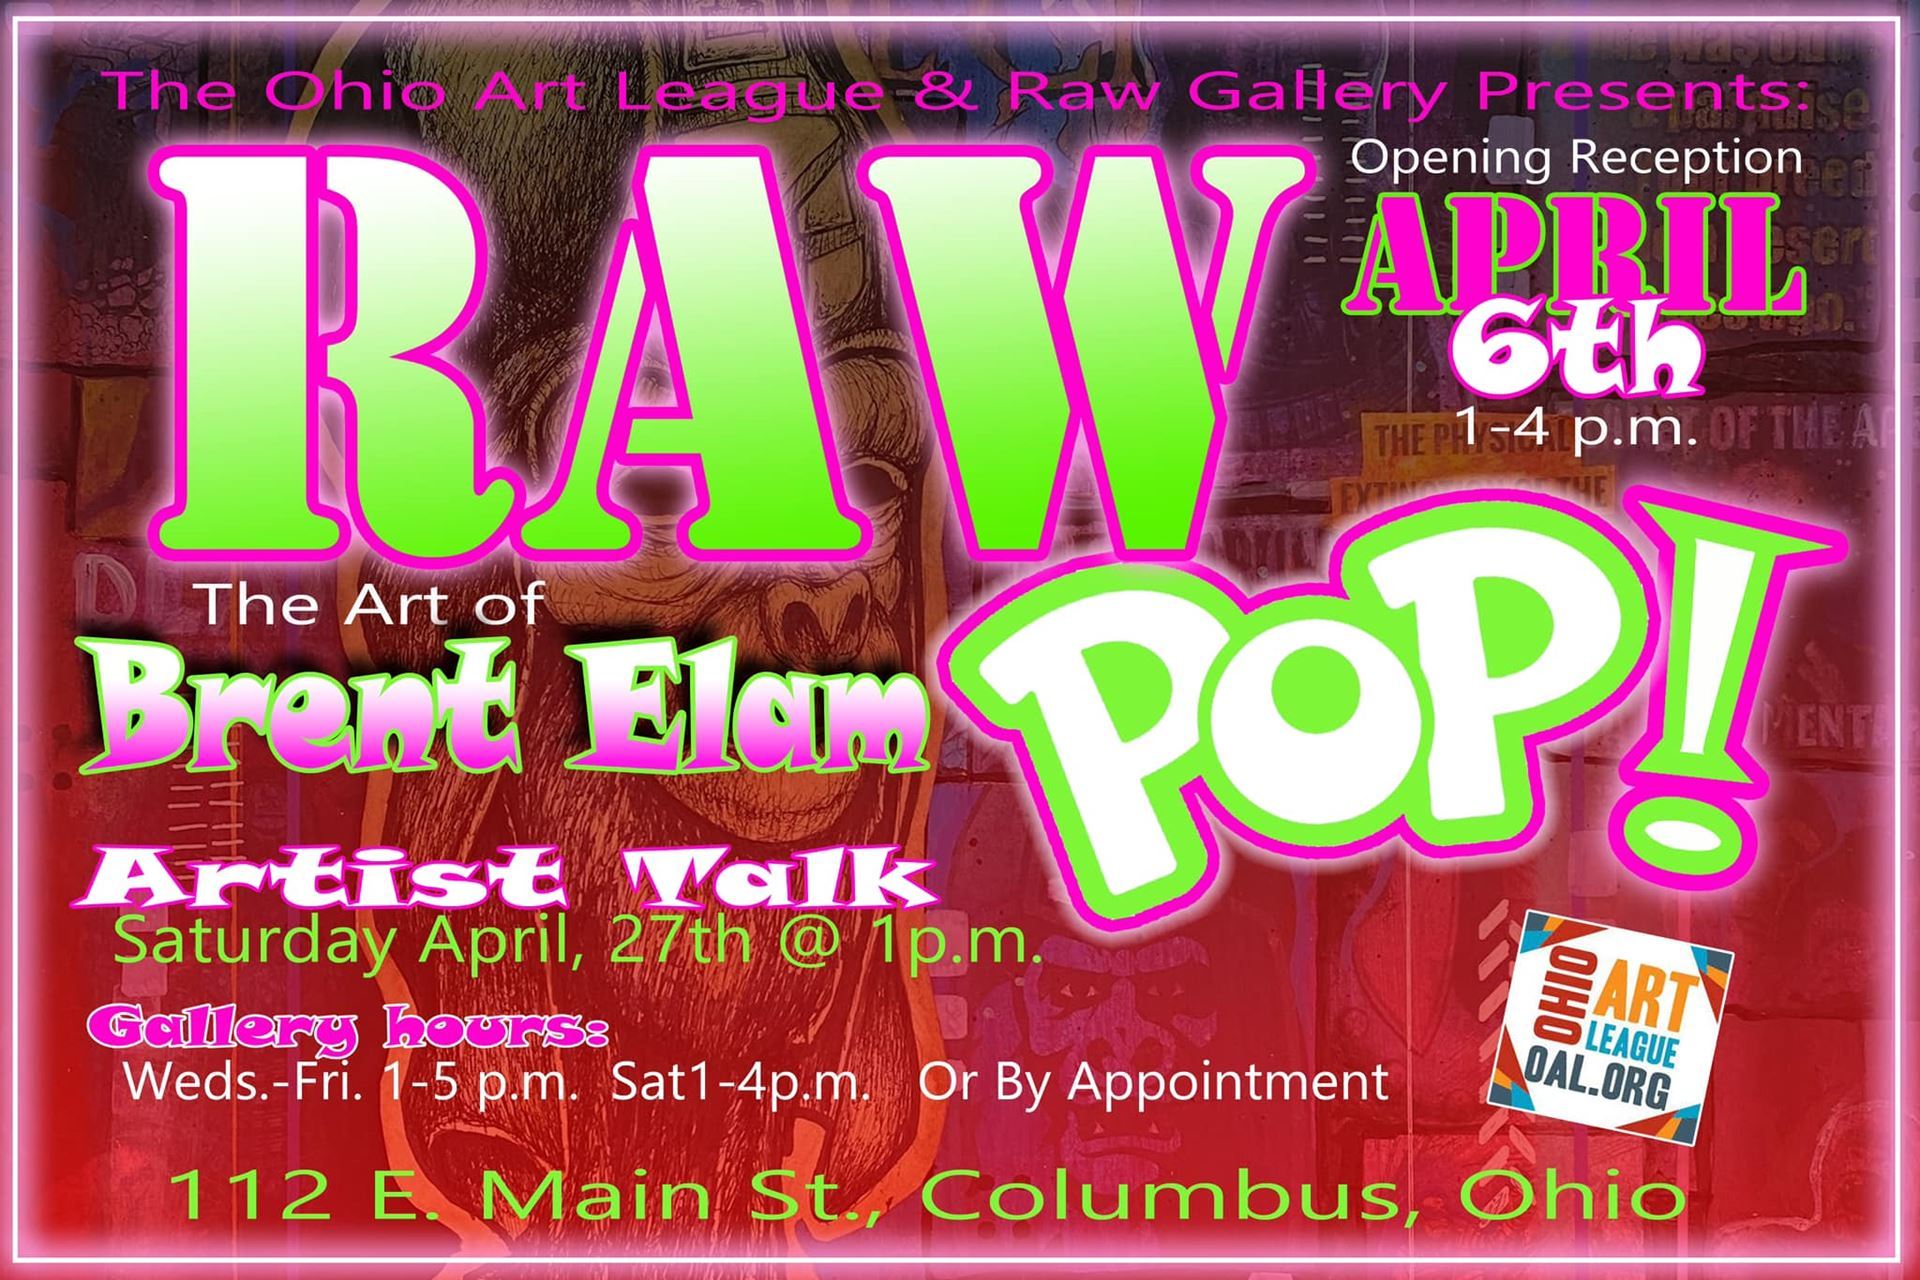 Graphic for RAW Pop. Text reads: The Ohio Art League and Raw Gallery Presents: RAW Pop! The art of Brent Elam.  Opening Reception April 6th 1-4 PM. Artist Talk: Saturday, April 27th at 1PM, Gallery hours: Wed-Fri 1-5 PM and Sat 1-4 PM or by appointment.  112 E Main St, Columbus, Ohio